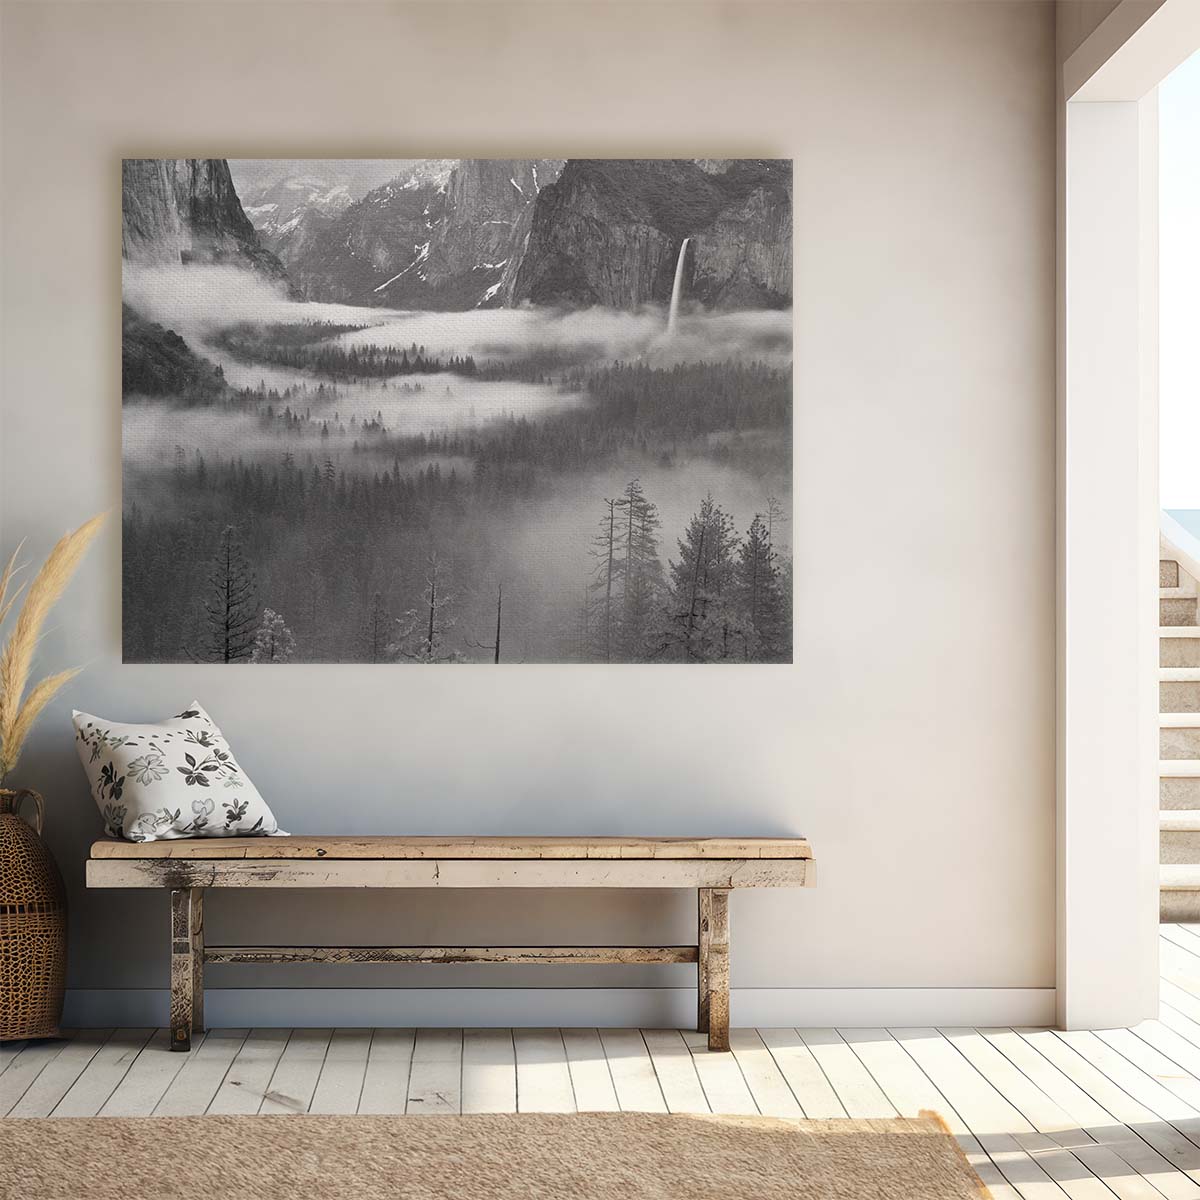 Yosemite Valley Foggy Forest Waterfall Monochrome Wall Art by Luxuriance Designs. Made in USA.